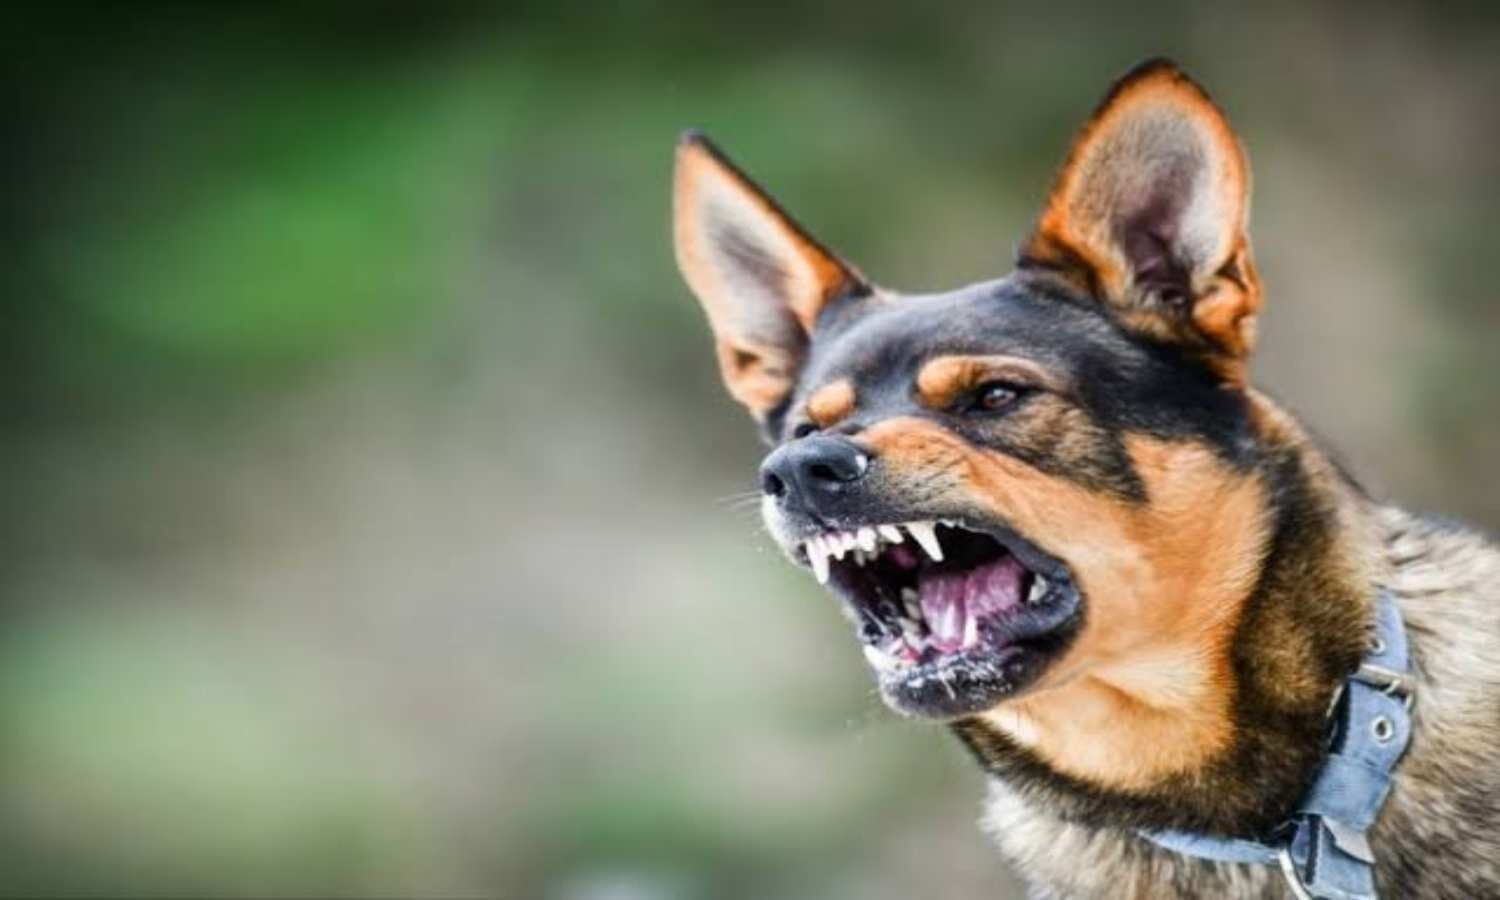 Dogs Bite Without Warning: Why Dogs Are Getting More Aggressive, Know The Reasons